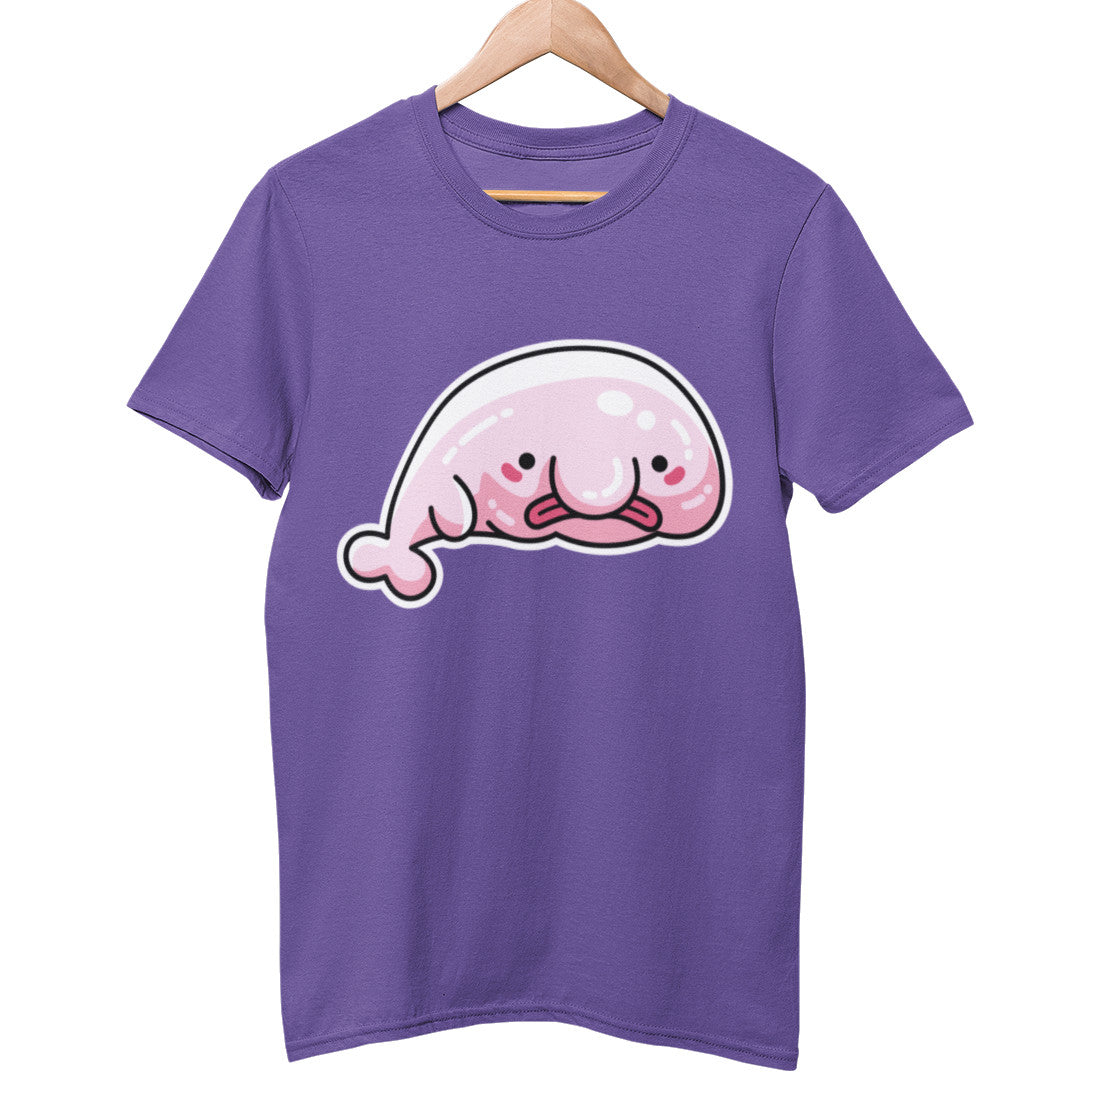 A purple unisex crewneck t-shirt on a wooden hanger with a design on its chest of a kawaii cute pink blobfish facing to the right